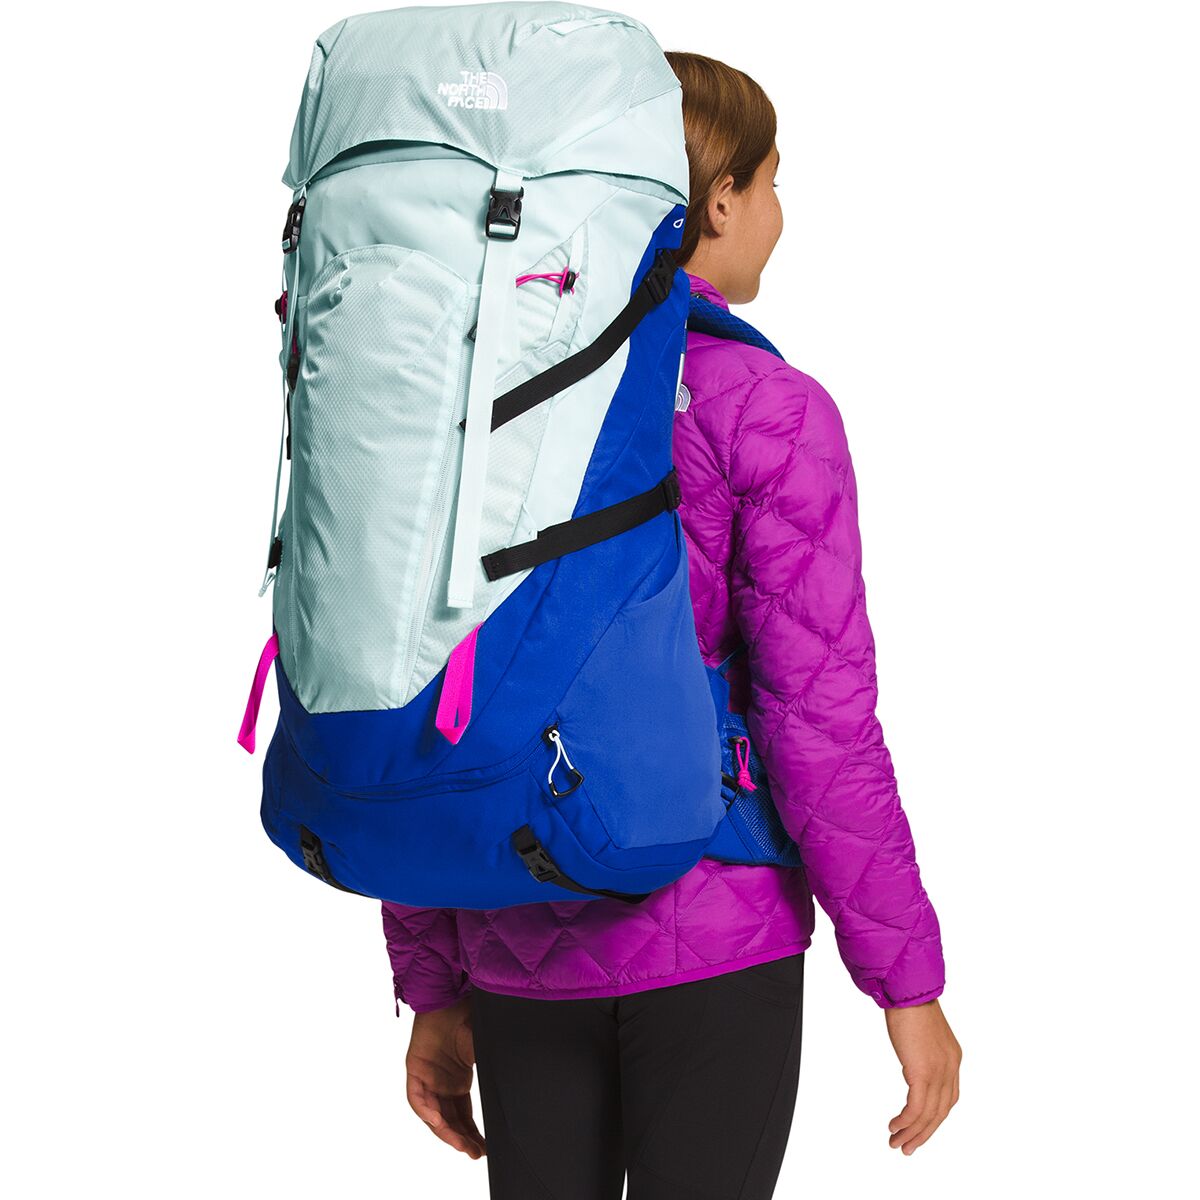 The North Face 55L Backpack - Kids